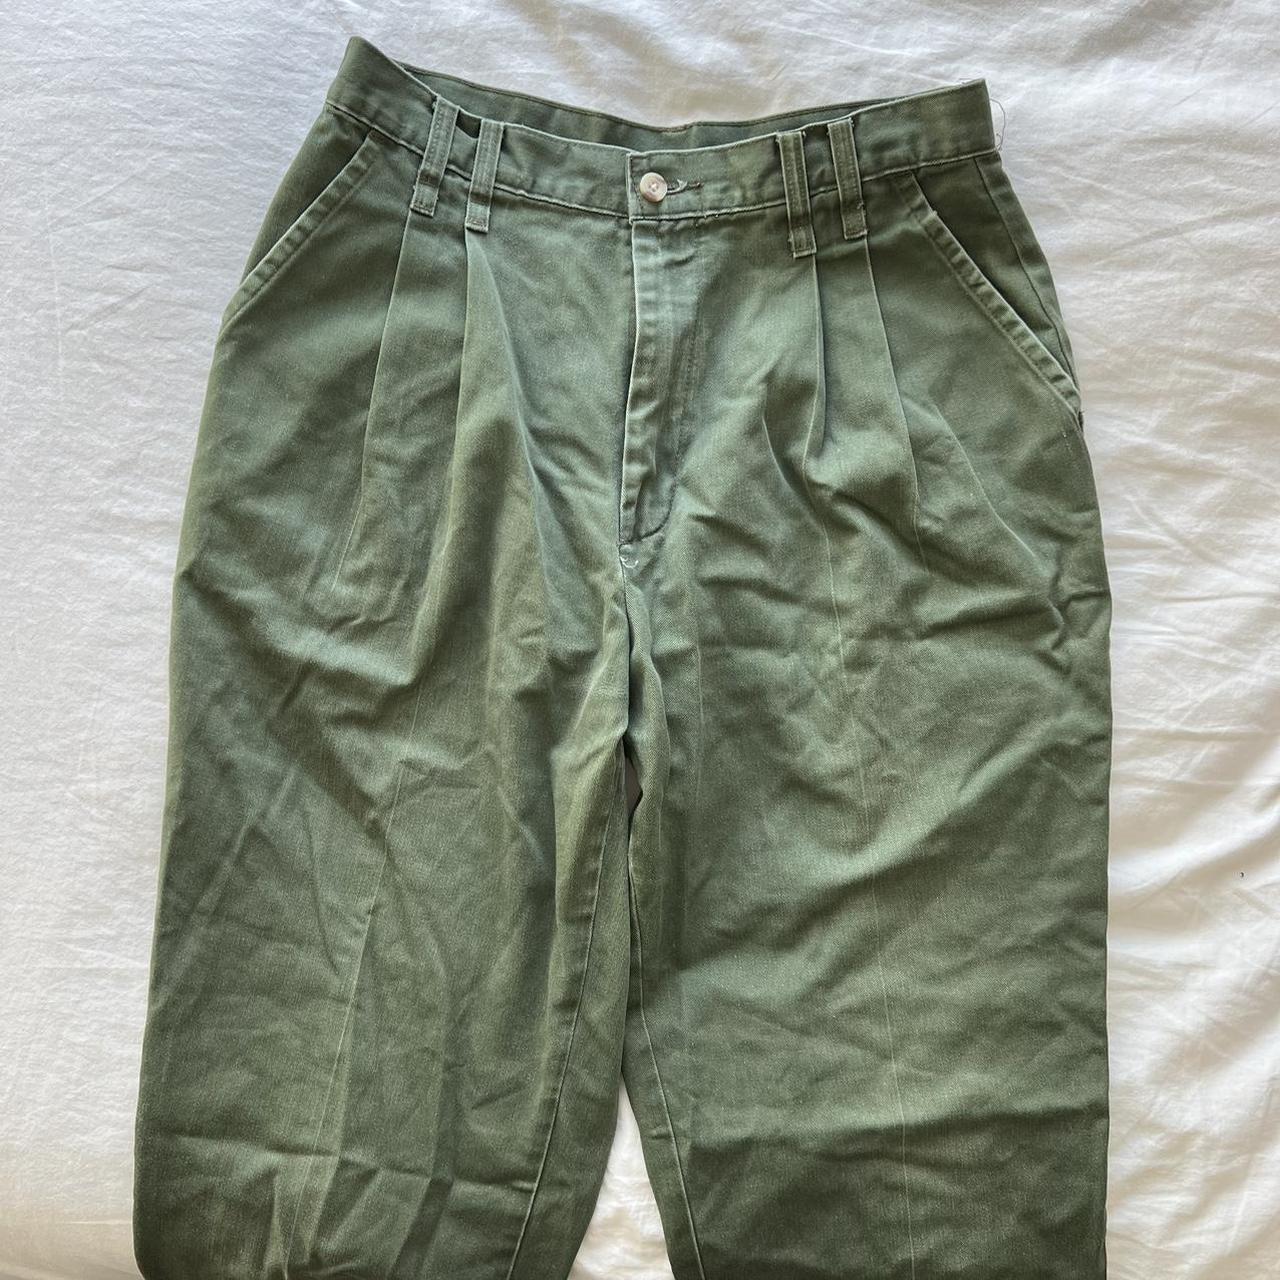 Chic Women's Khaki and Green Trousers (2)